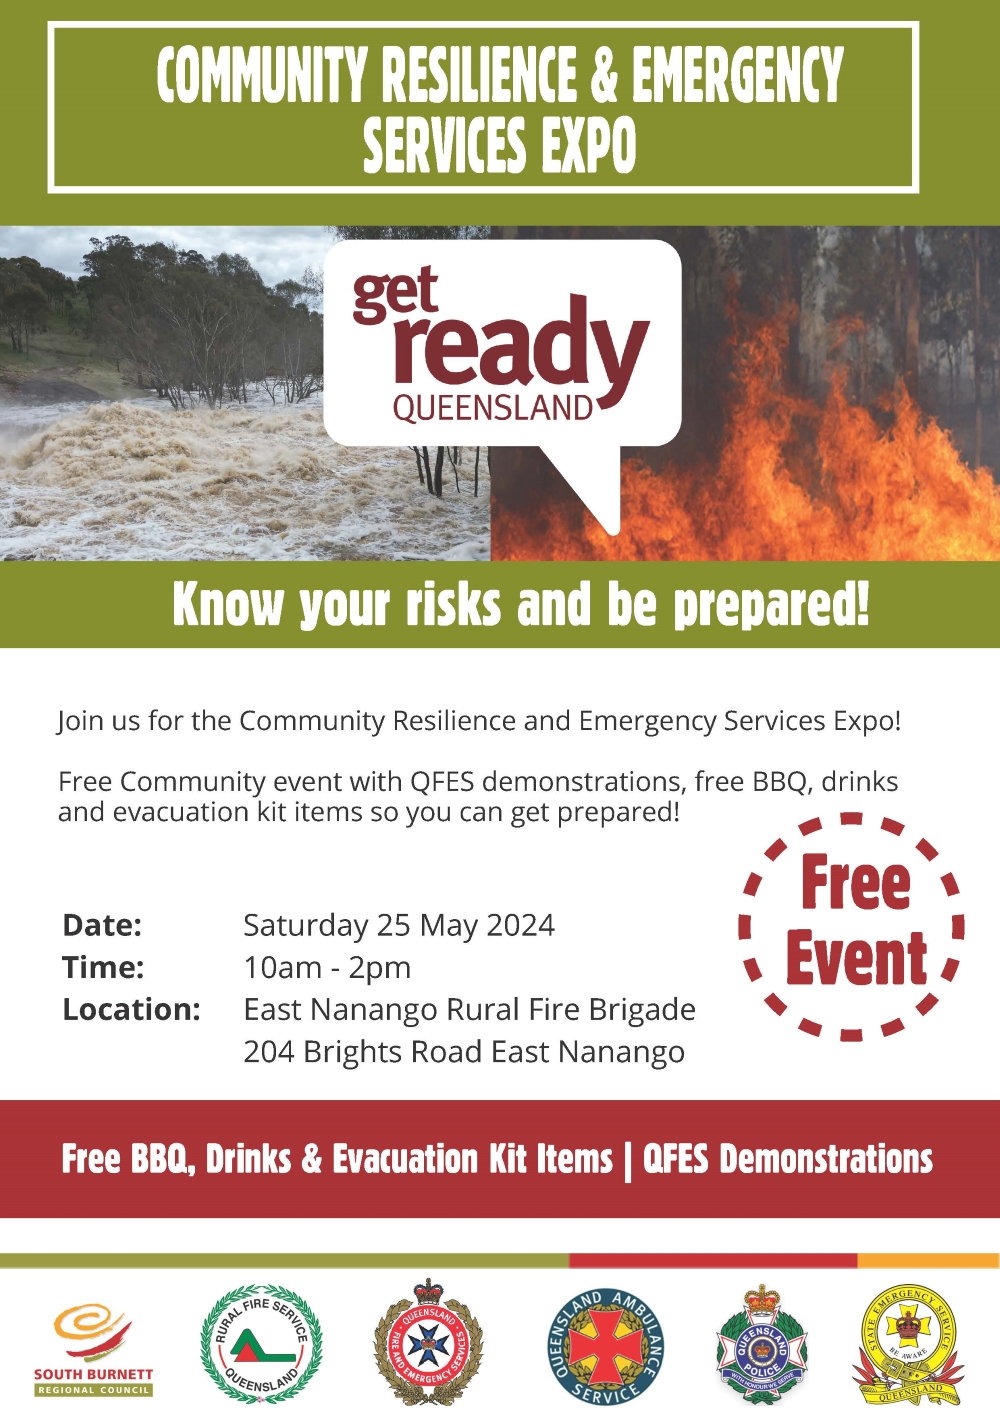 Community resilience and emergency services expo nanango east rural fire brigade